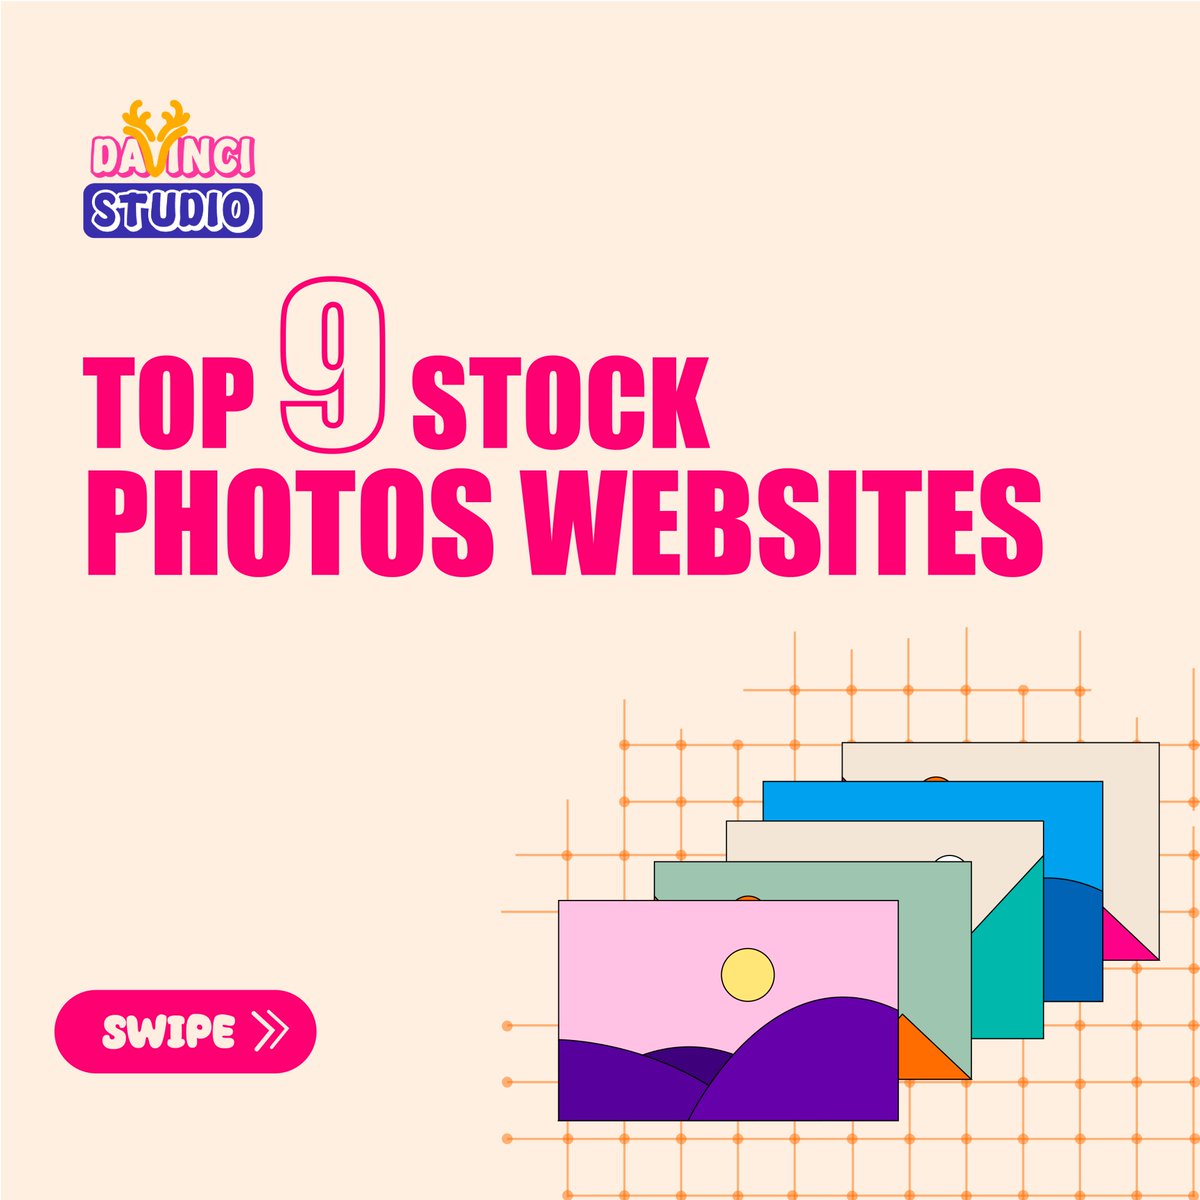 📸 Looking for high-quality stock photos for your creative projects? Check out our top 9 stock photo websites that offer stunning visuals to enhance your content!

#StockPhotos #Photography #VisualContent #CreativeResources #DesignInspiration #Twitter #carousel